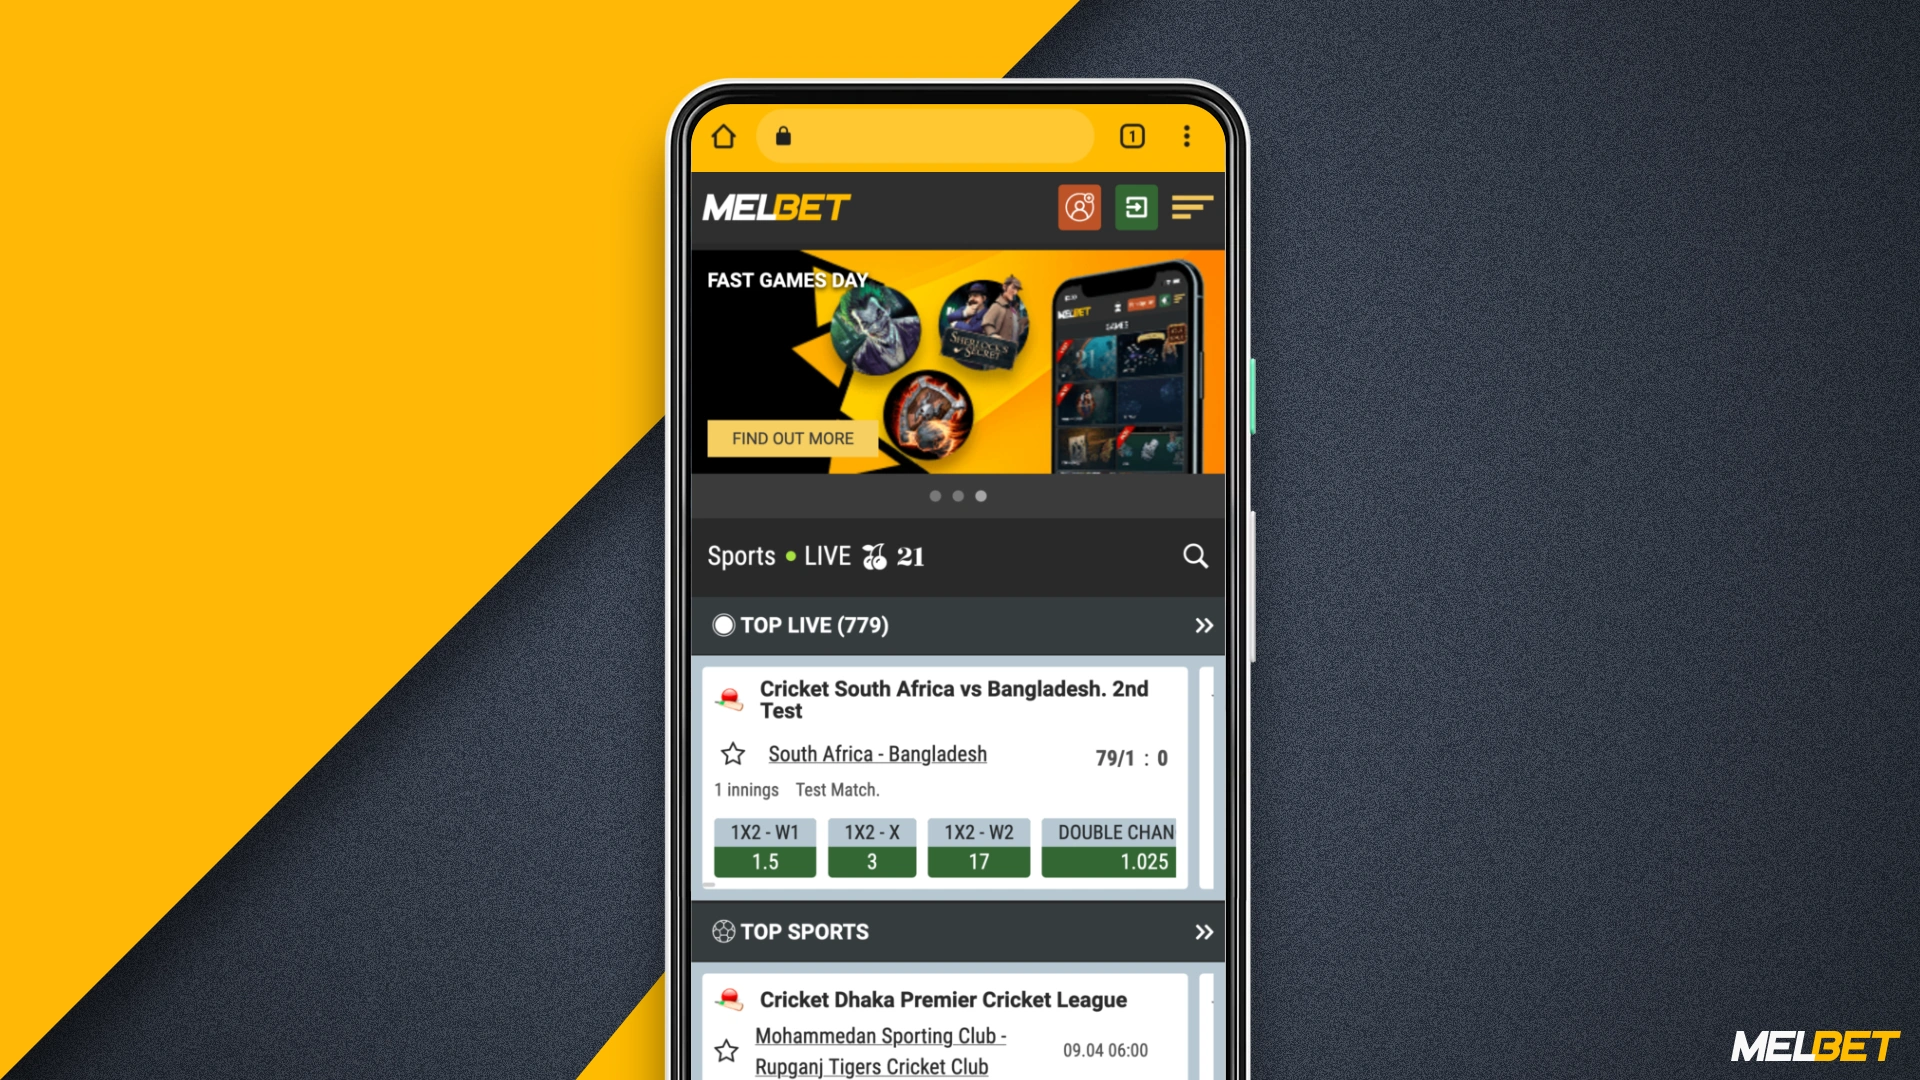 The mobile version of Melbet is not much different from the app, so if for some reason you do not want to install an app, but want to bet on sports from smartphone - use the mobile version